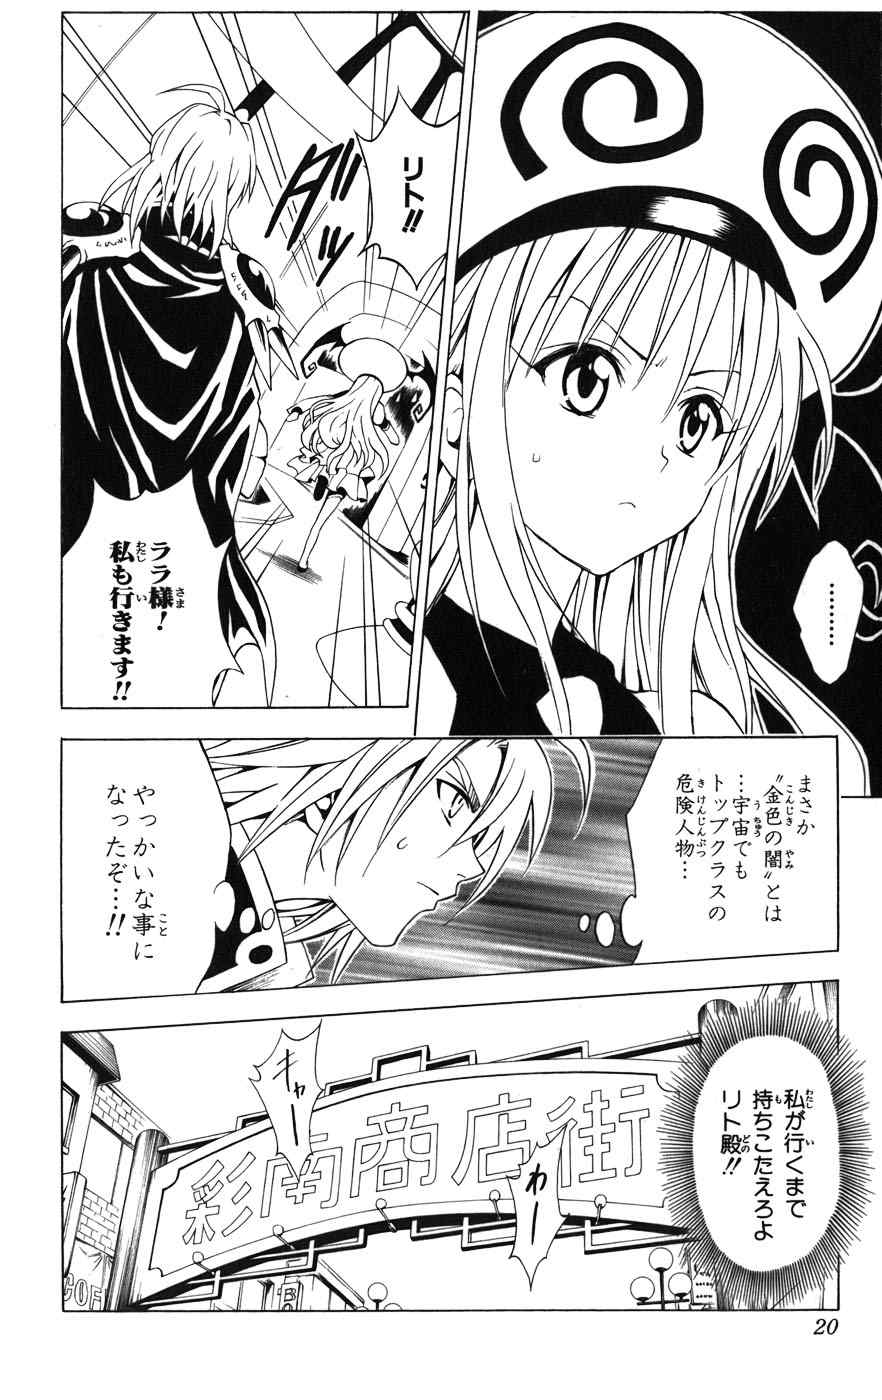 《To LOVEるとらぶる》漫画 To LOVE 05卷